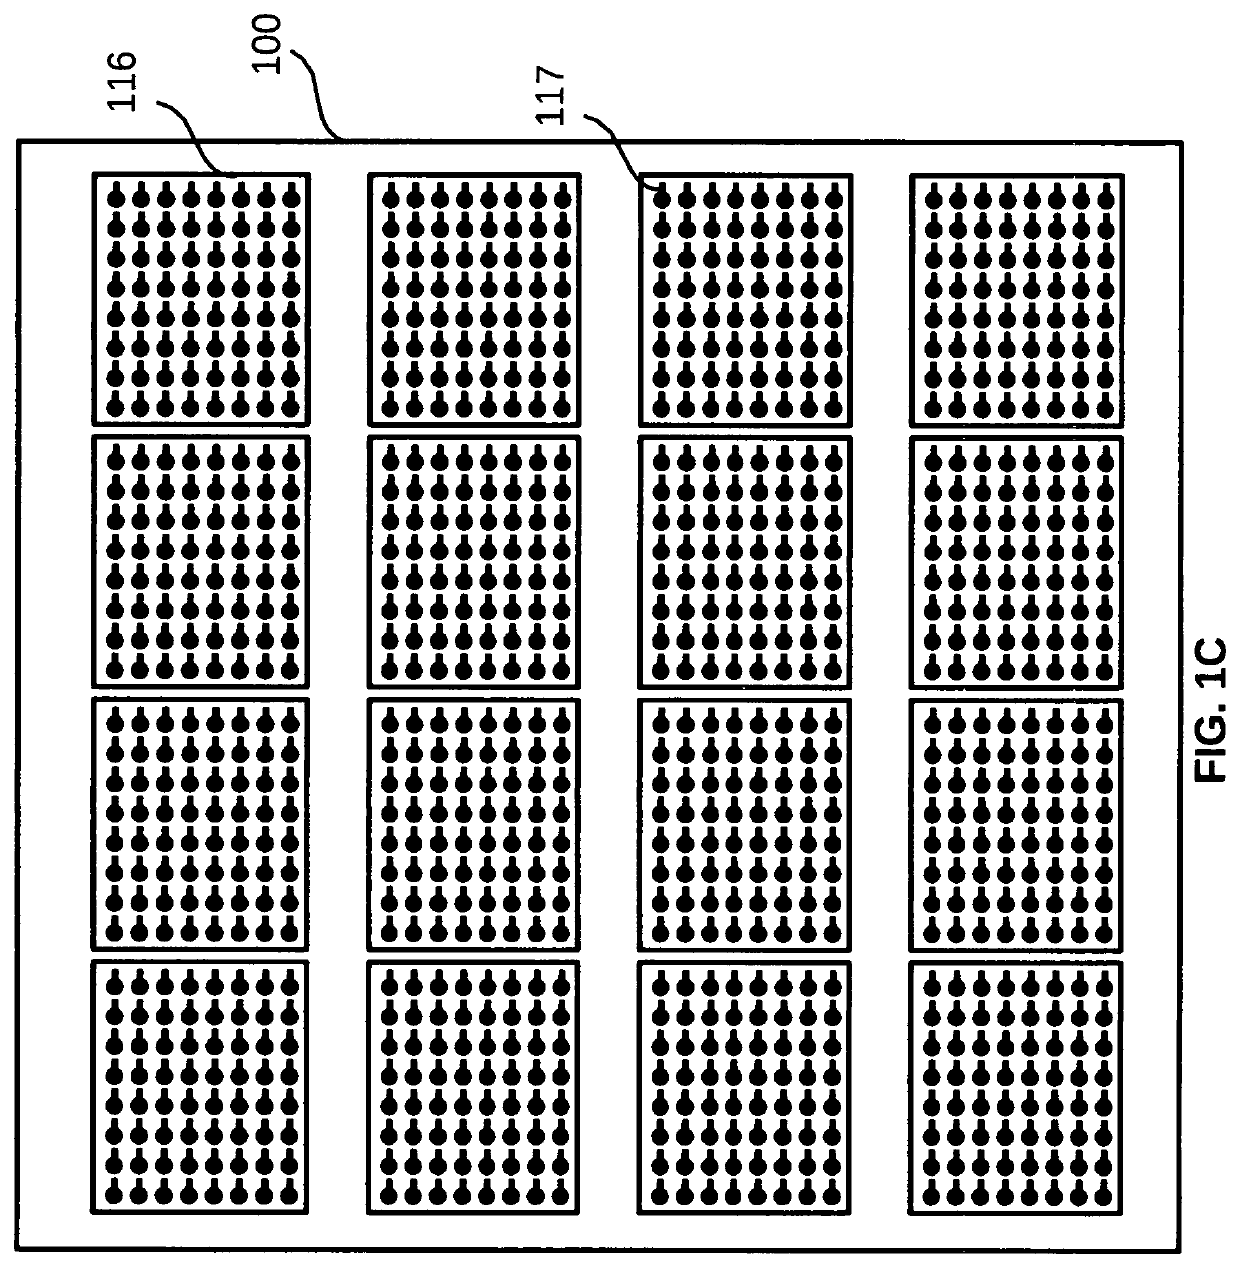 Method and system for co-packaging photonics integrated circuit with an application specific integrated circuit